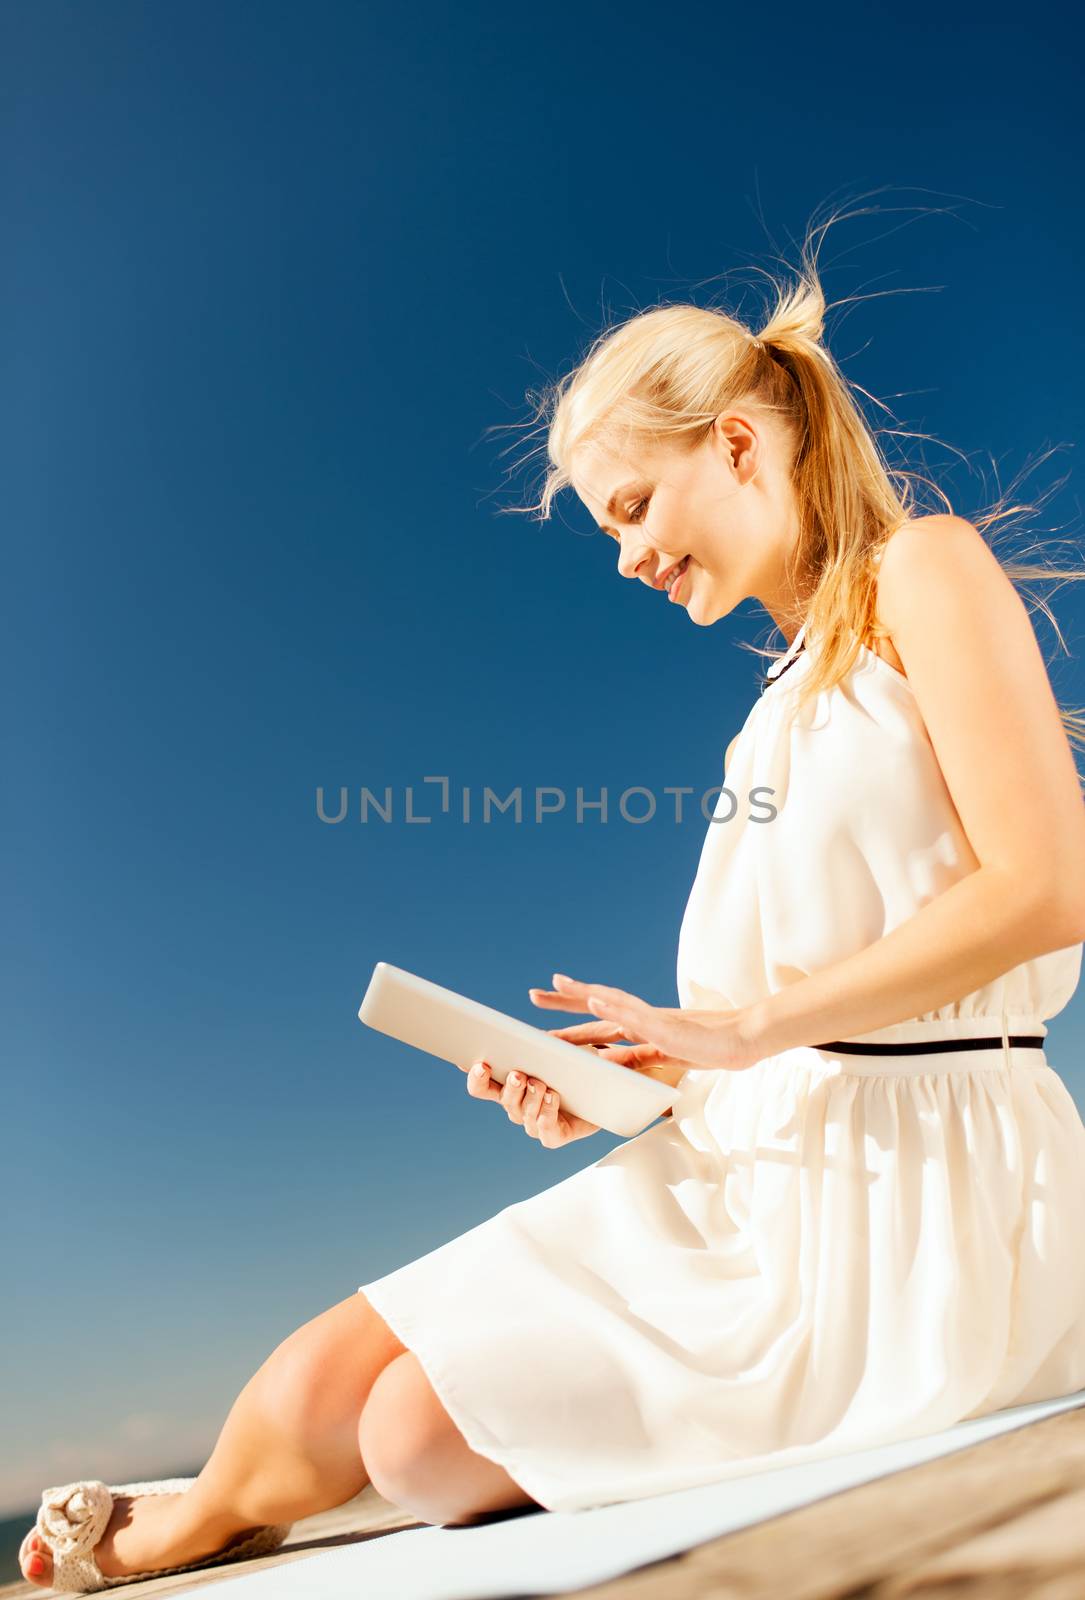 internet and lifestyle - young woman working with tablet pc outdoors